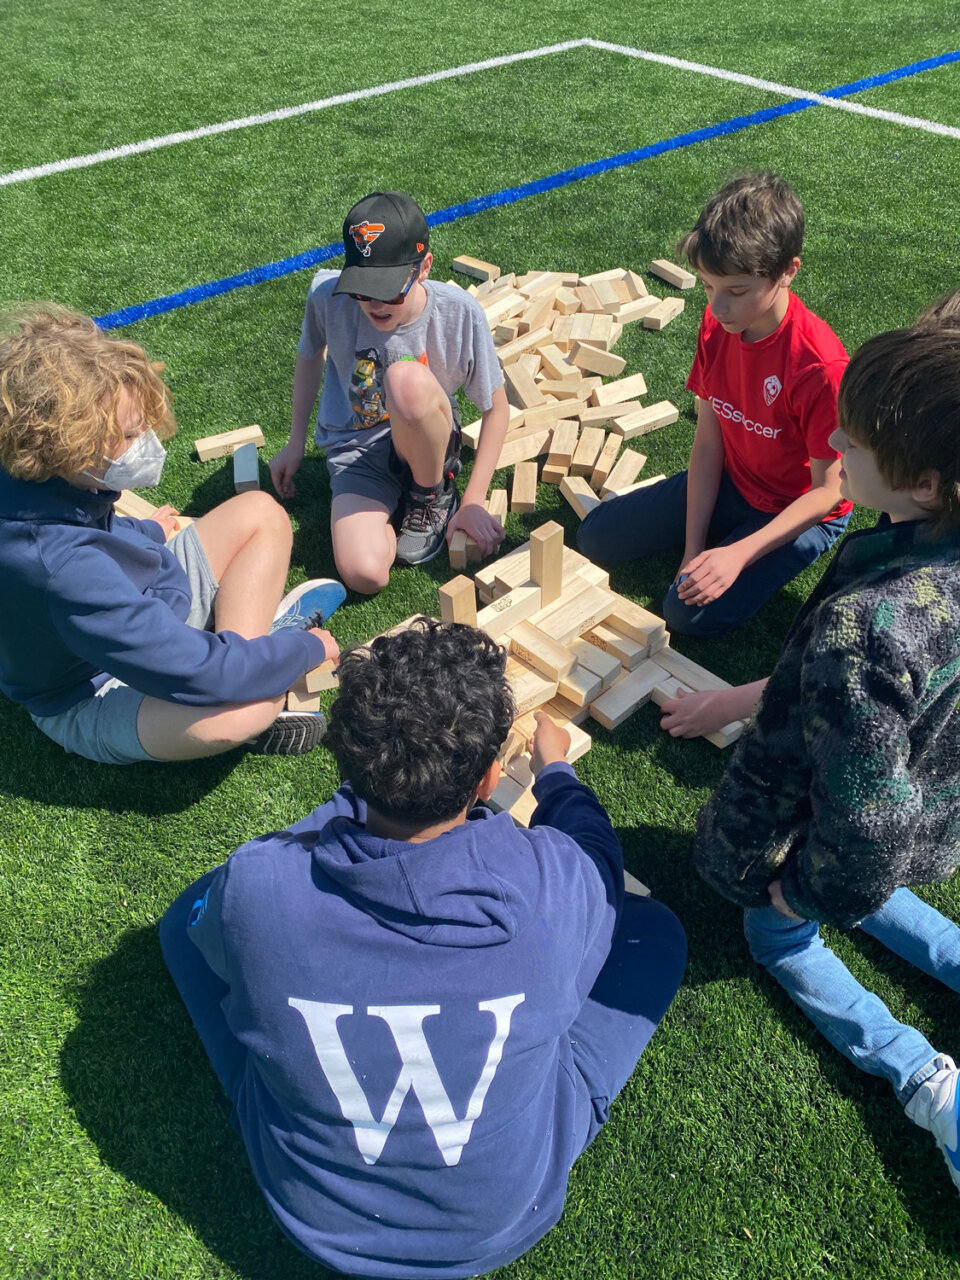 Williams School students play jenga outside on soccer field on senior day